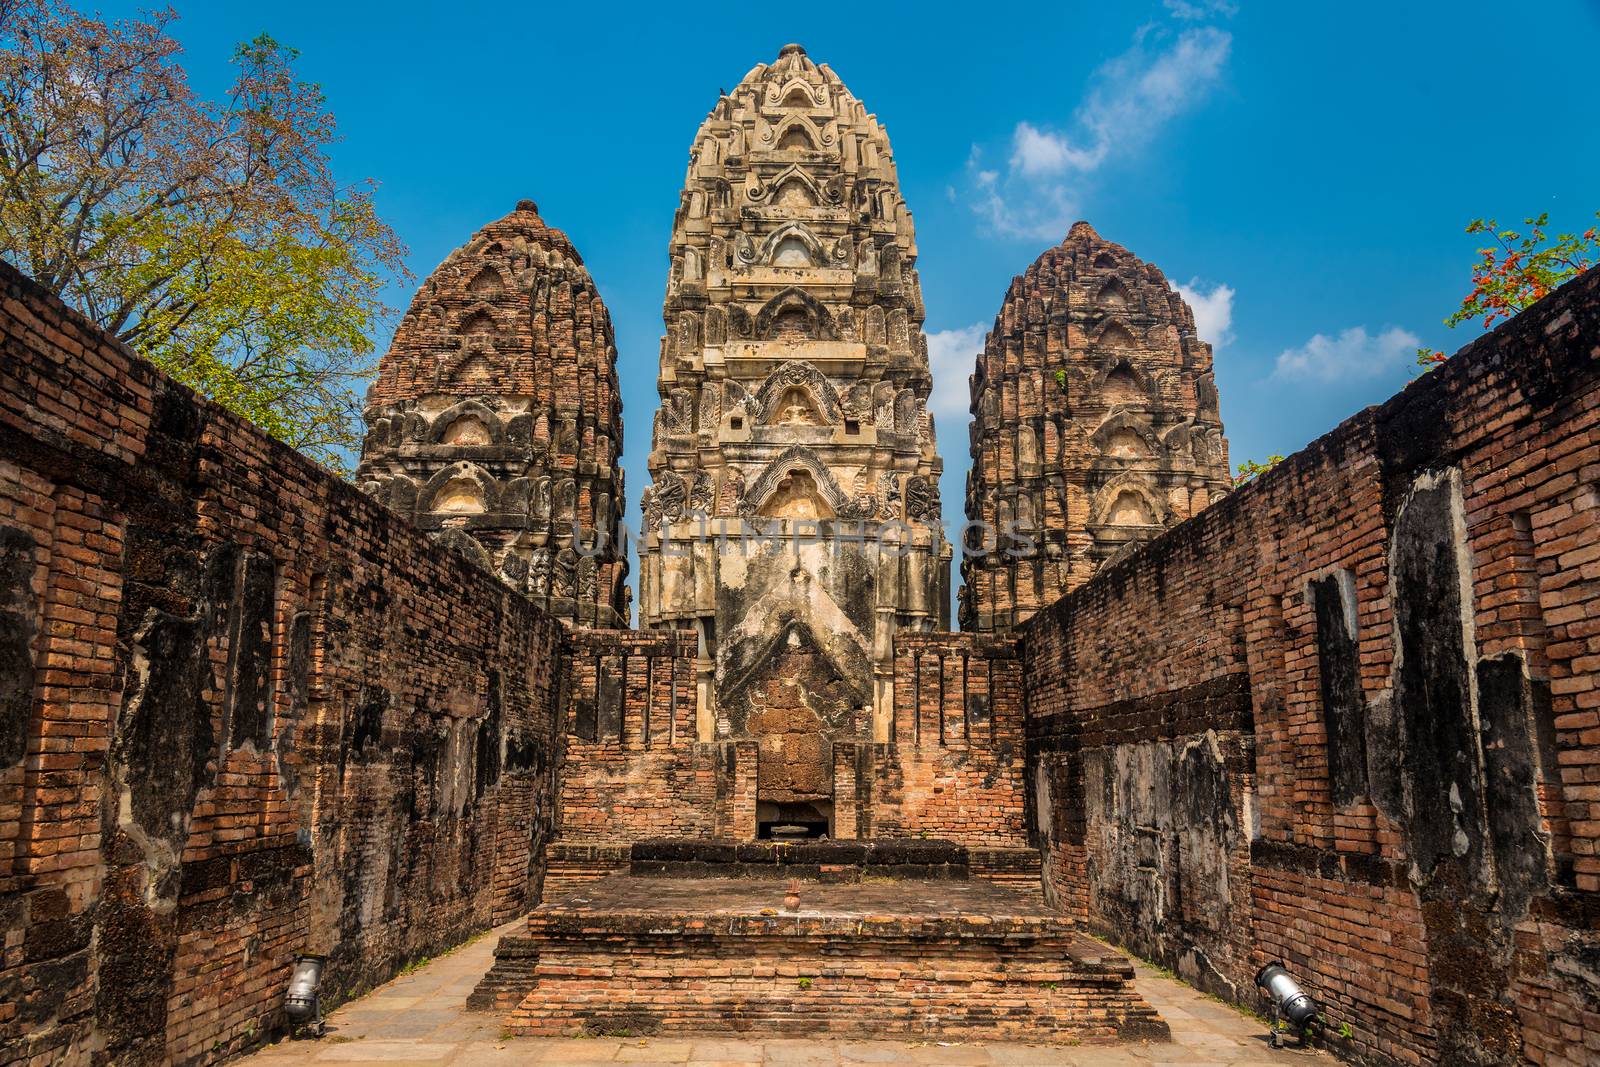 The ancient temple of Wat Sri Sawai which was constructed in late 12th century and is one of the oldest temples of Sukhothai Kingdom.